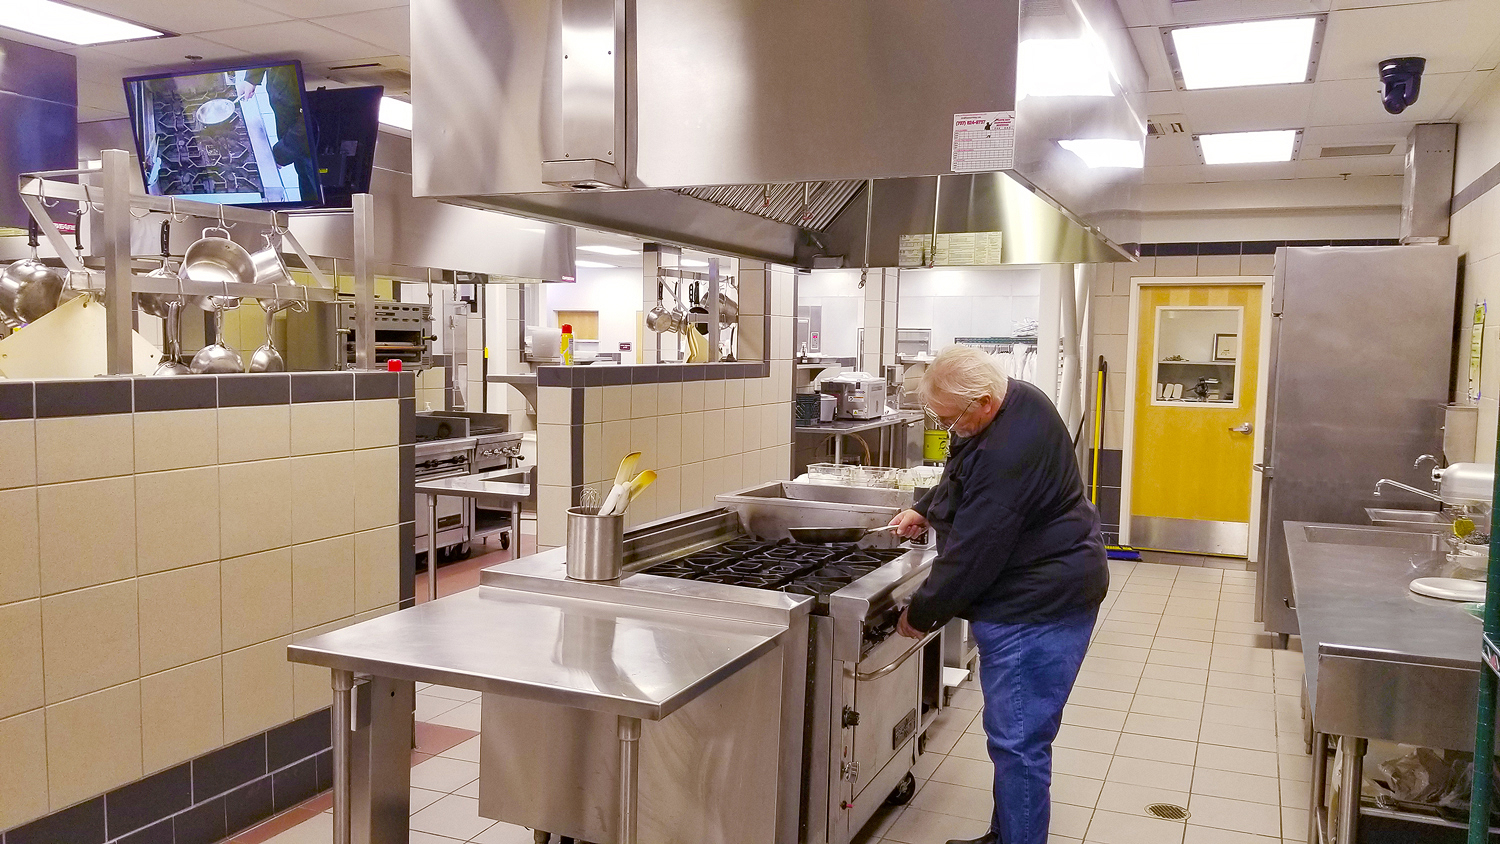 The culinary classroom includes six full commercial kitchens, and the instructor is a professional chef. A NAV® Pro AVoIP system enables signal distribution to the various displays.